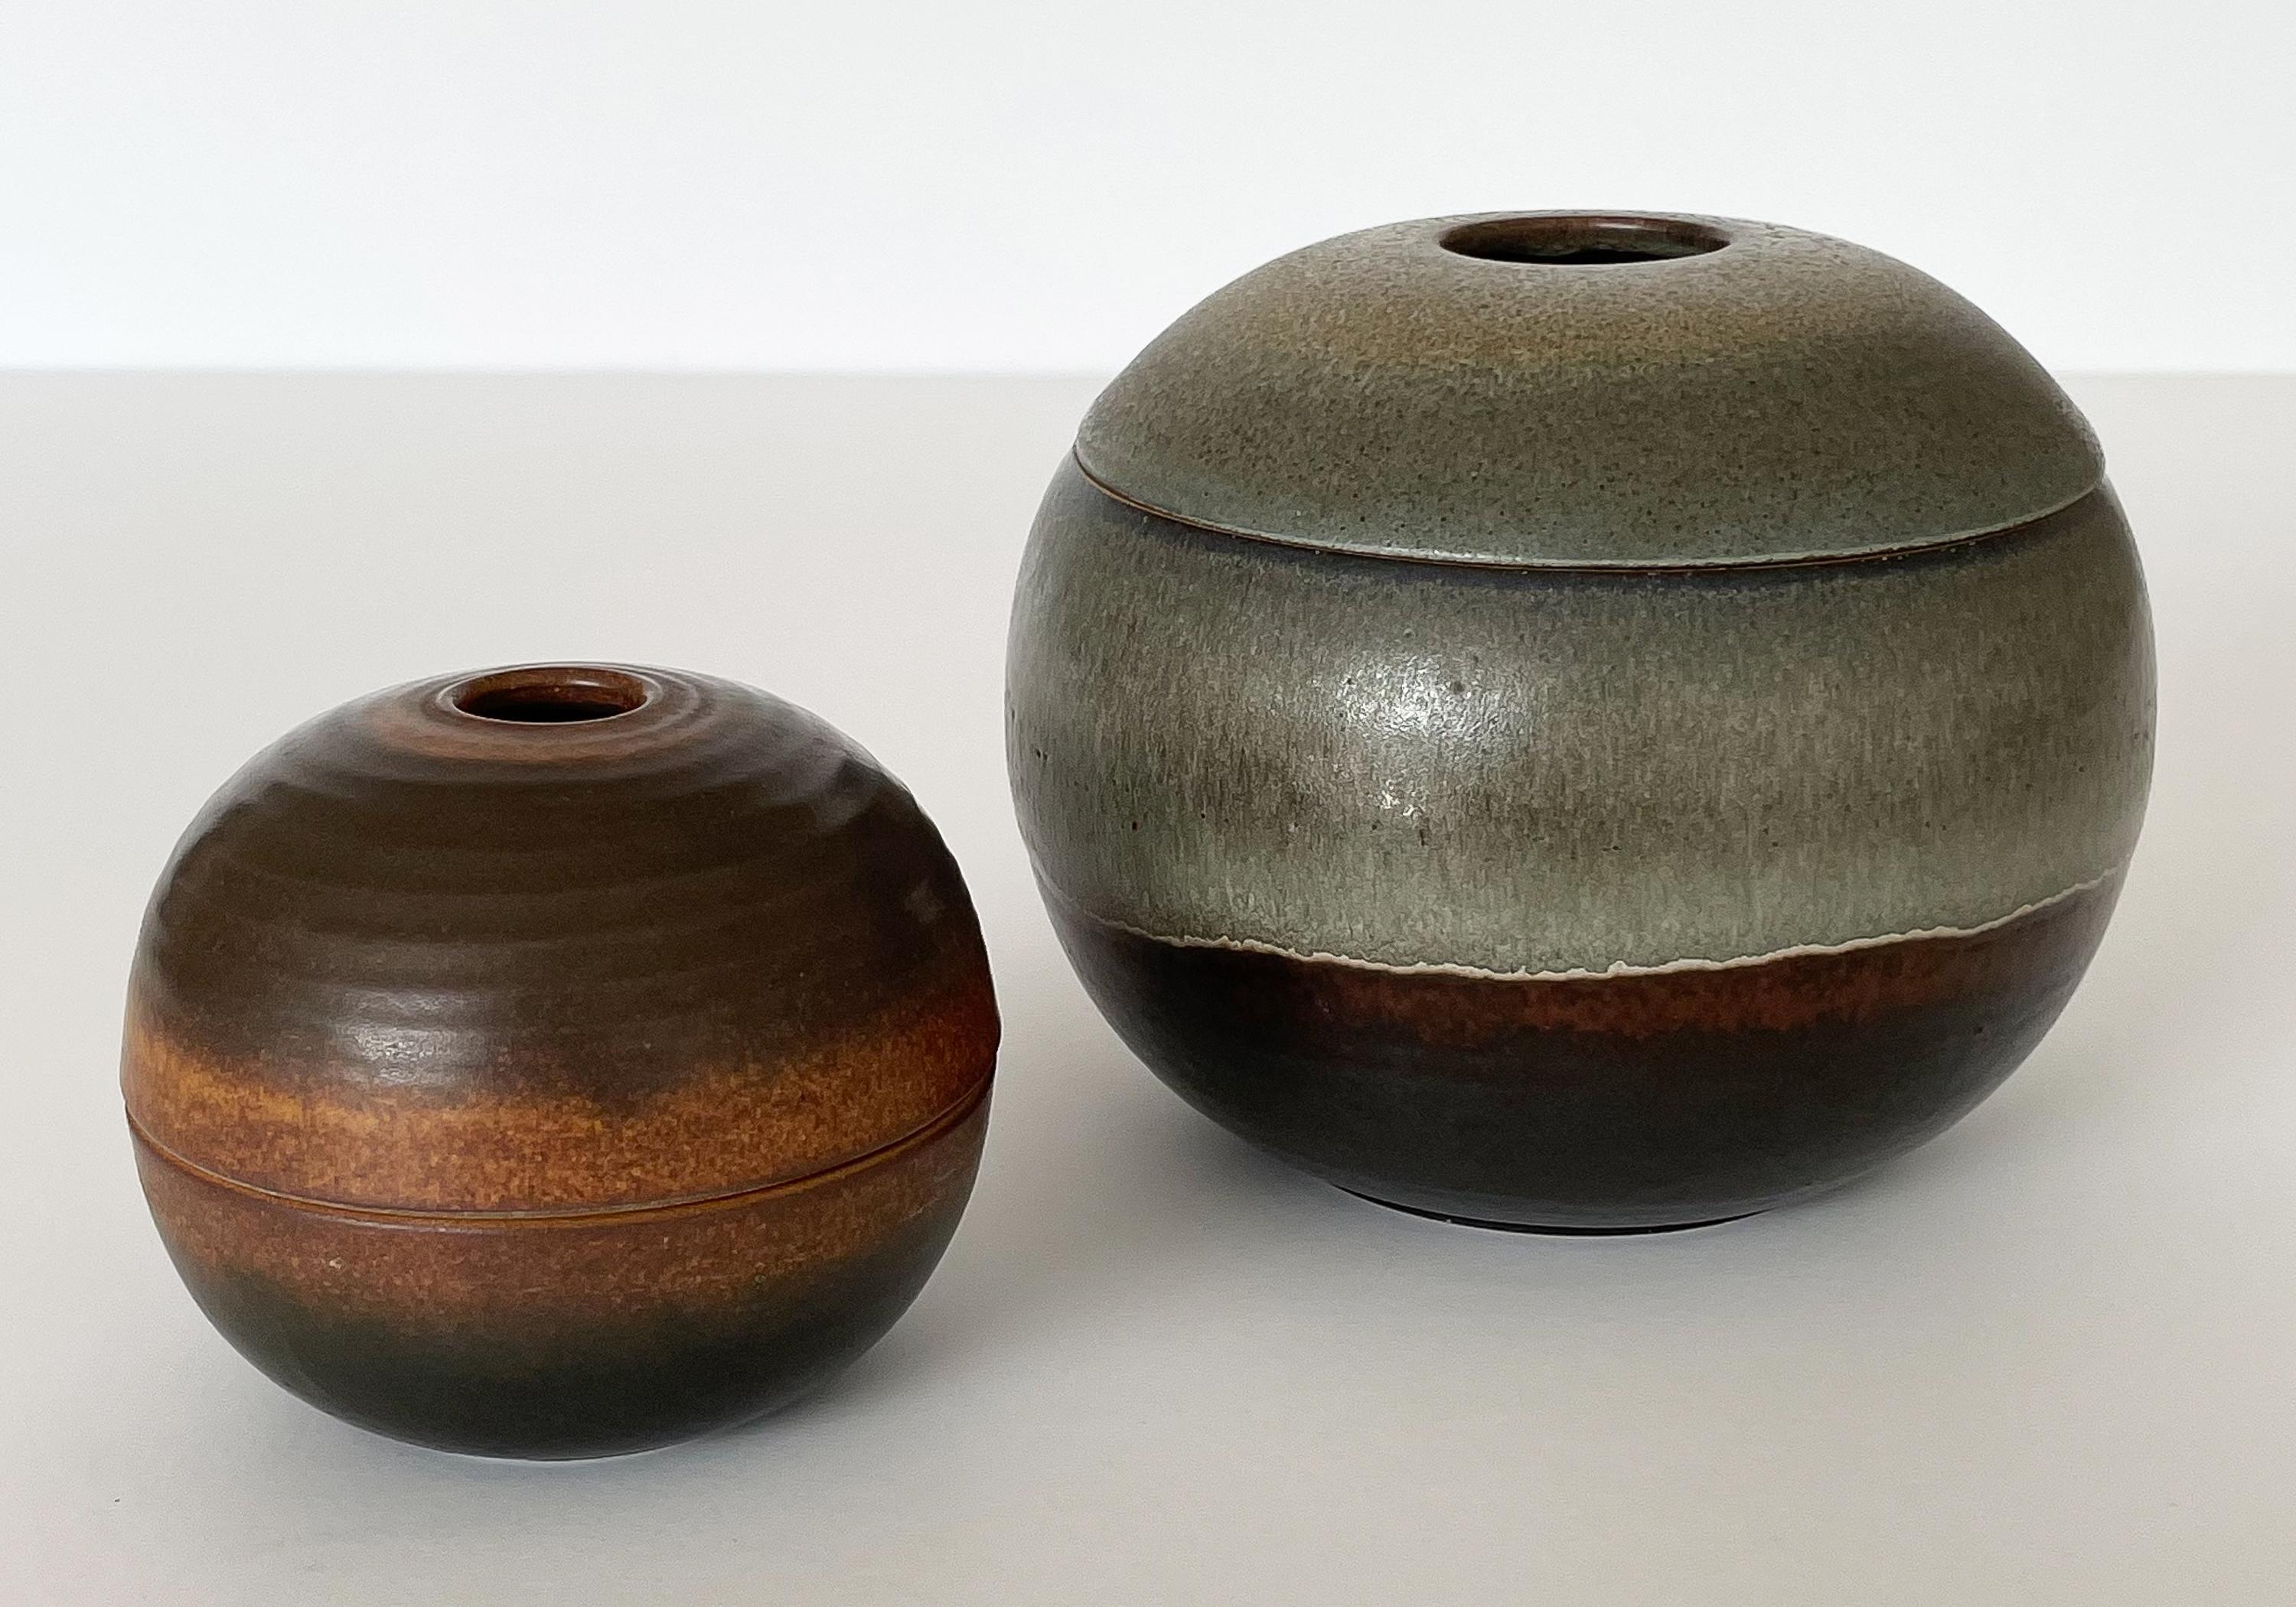 Set of two incredible Nanni Valenti ceramic sphere shaped boxes for Ceramica Arcore, Italy circa 1960s. These two ceramic lidded boxes pair extremely well together in both size and sophisticated colors. The larger box measures 5.5